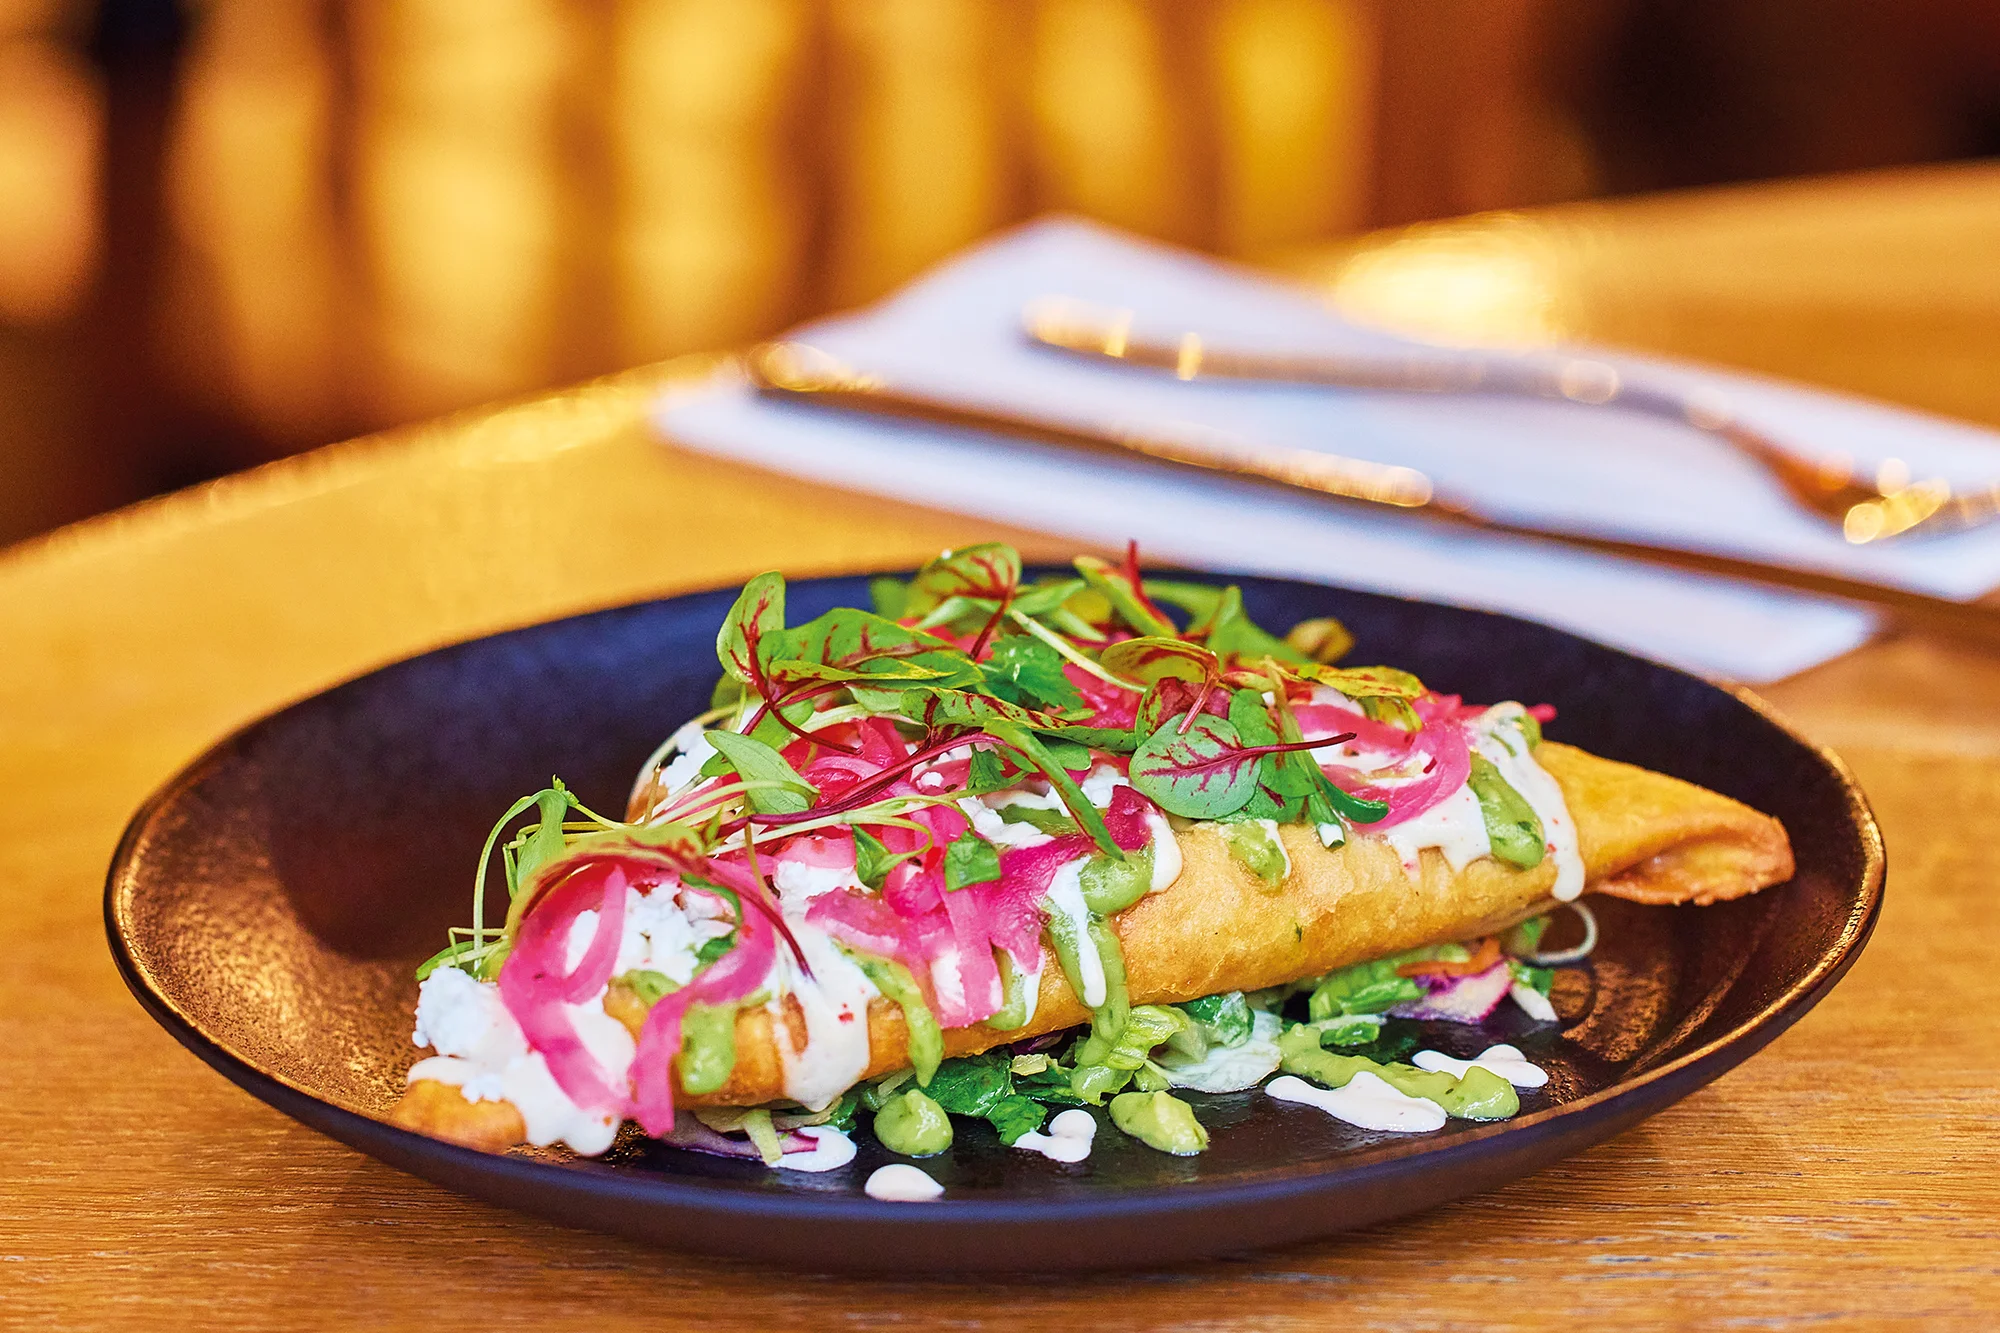 Our tetela special - a tortilla parcel packed with veggies and black beans, topped with vibrant pink pickled onions, avocado crema and a cashew crema